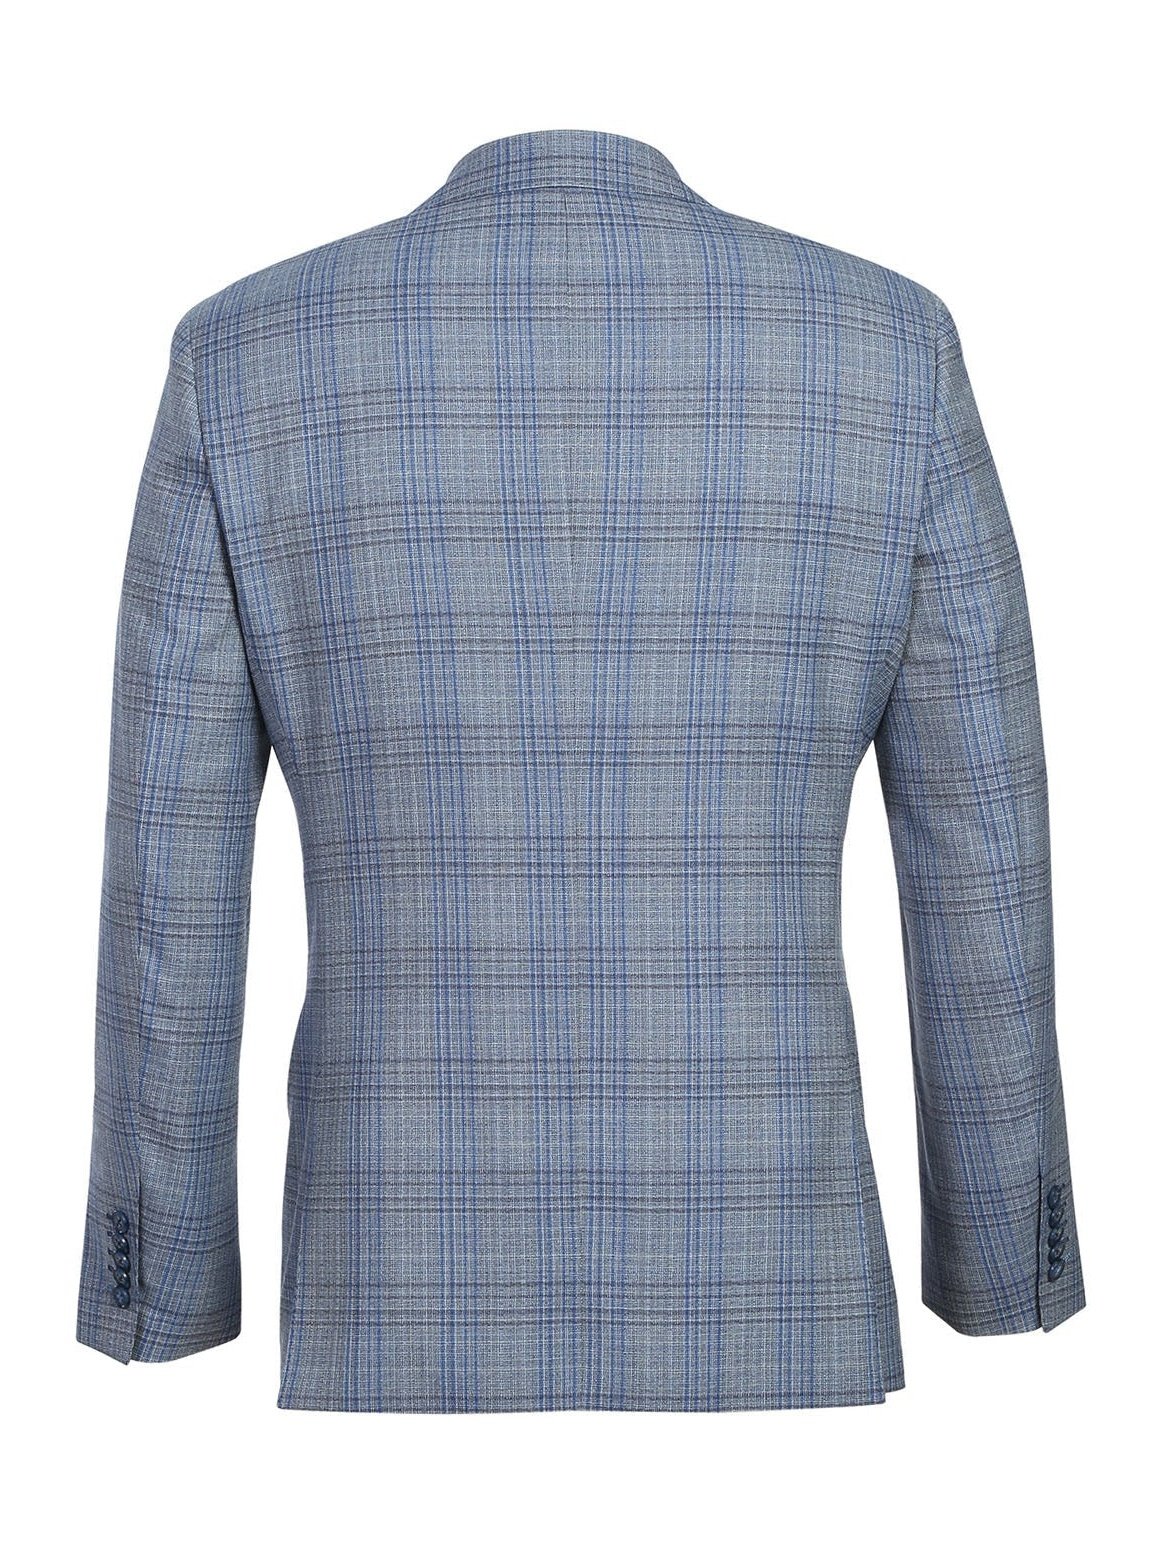 English Laundry Slim Fit Light Gray with Blue Check Wool Suit